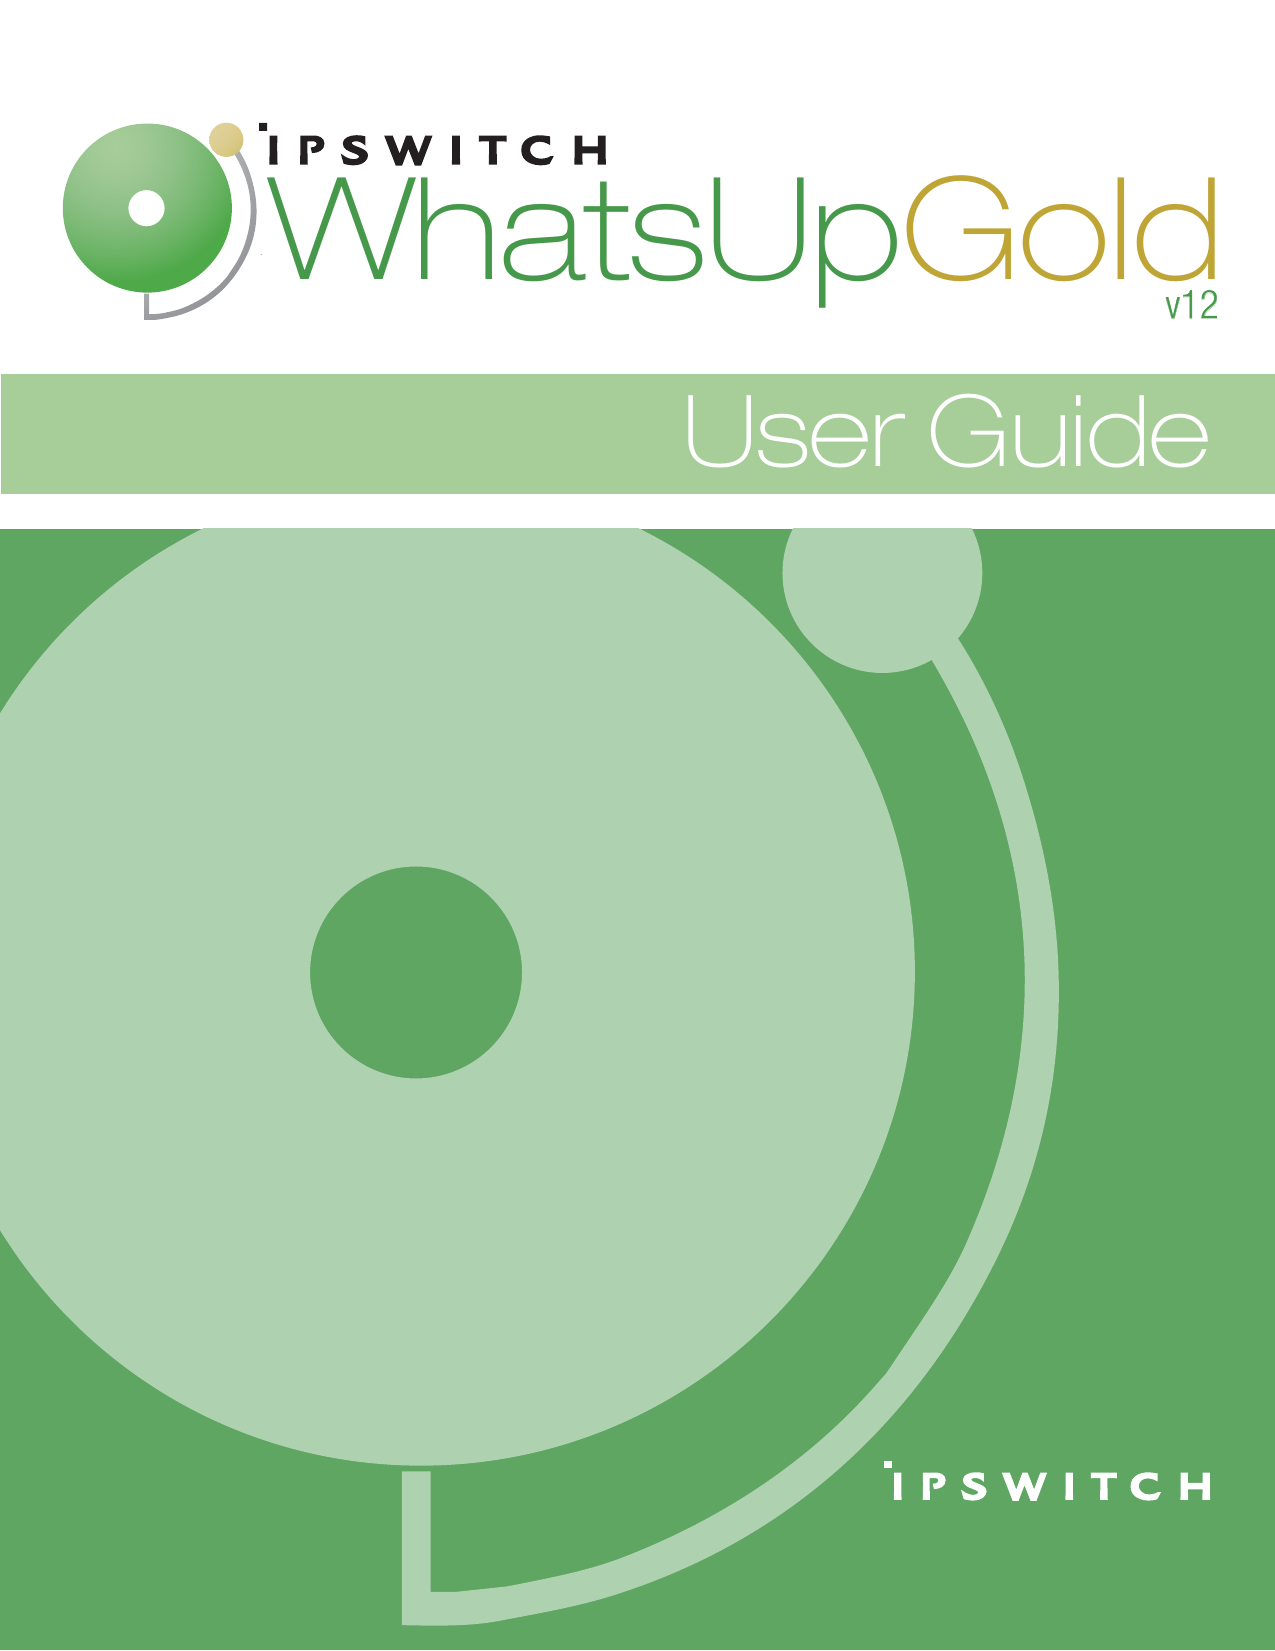 ipswitch whatsup gold cannot add passive monitor